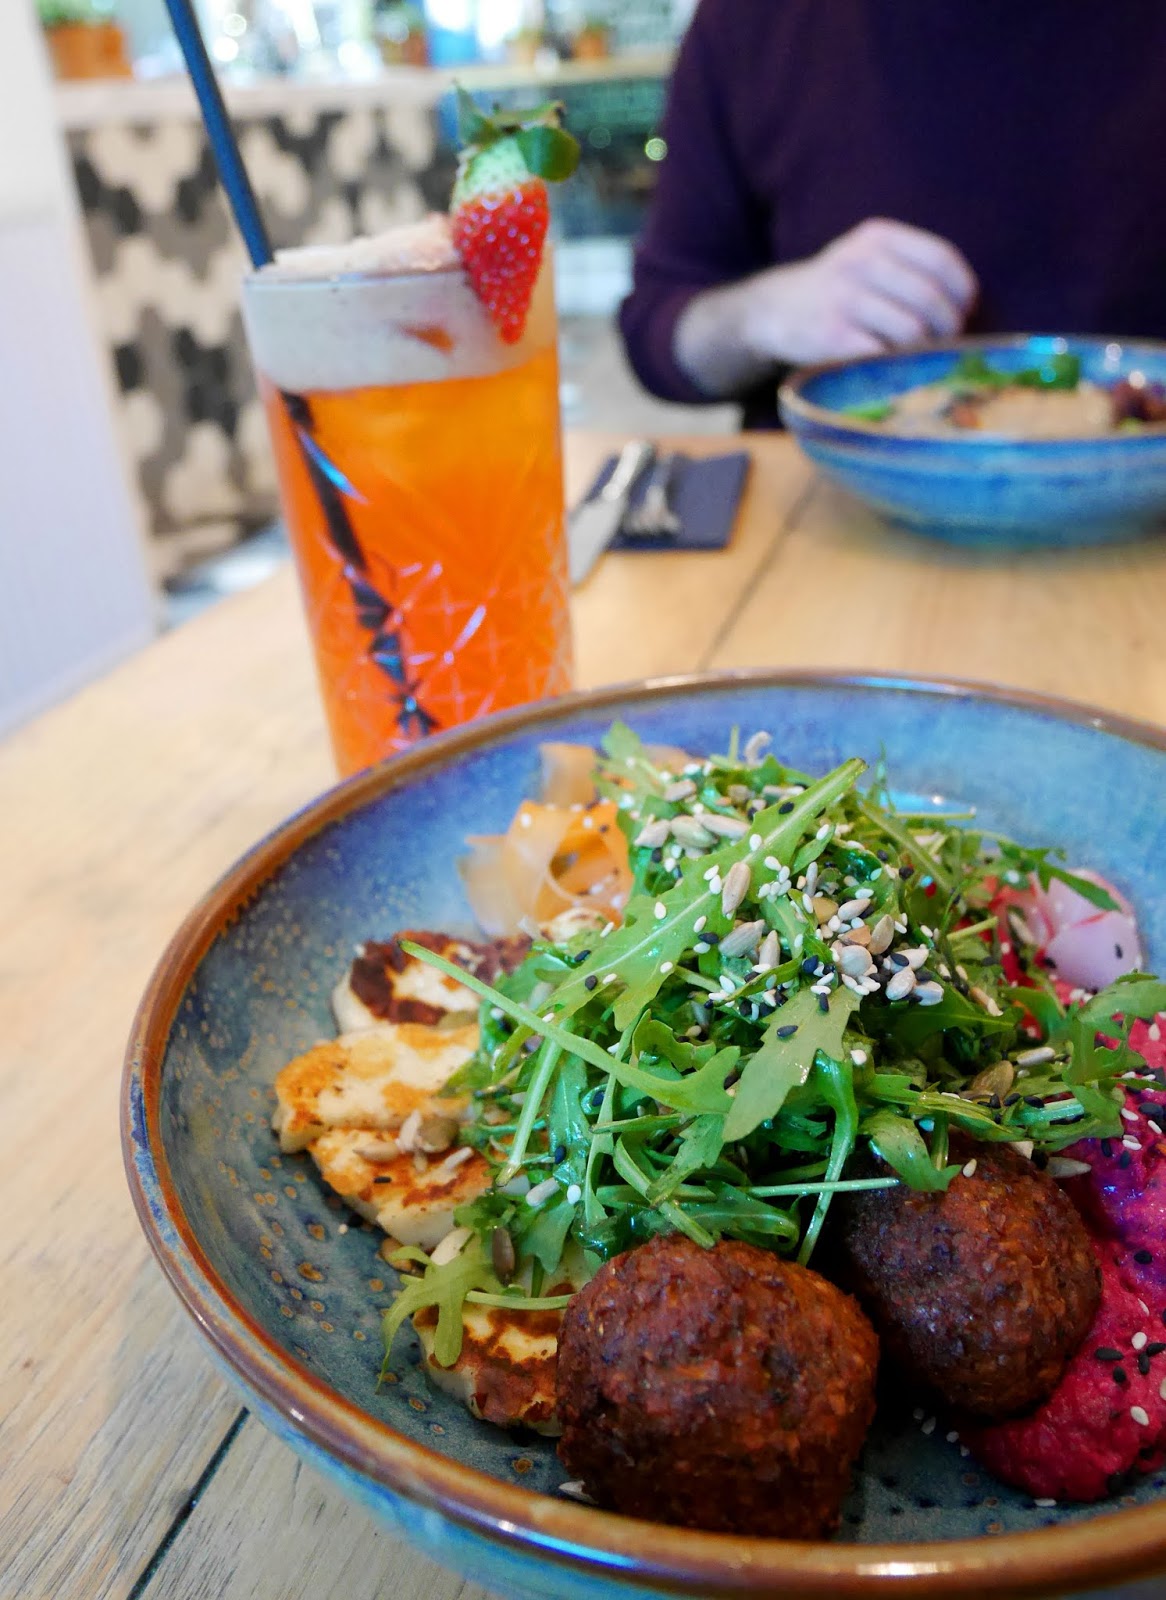 Strawbazzle fresh juice and a Falafel and Halloumi bowl at The Skinny Kitchen in Canterbury, Kent